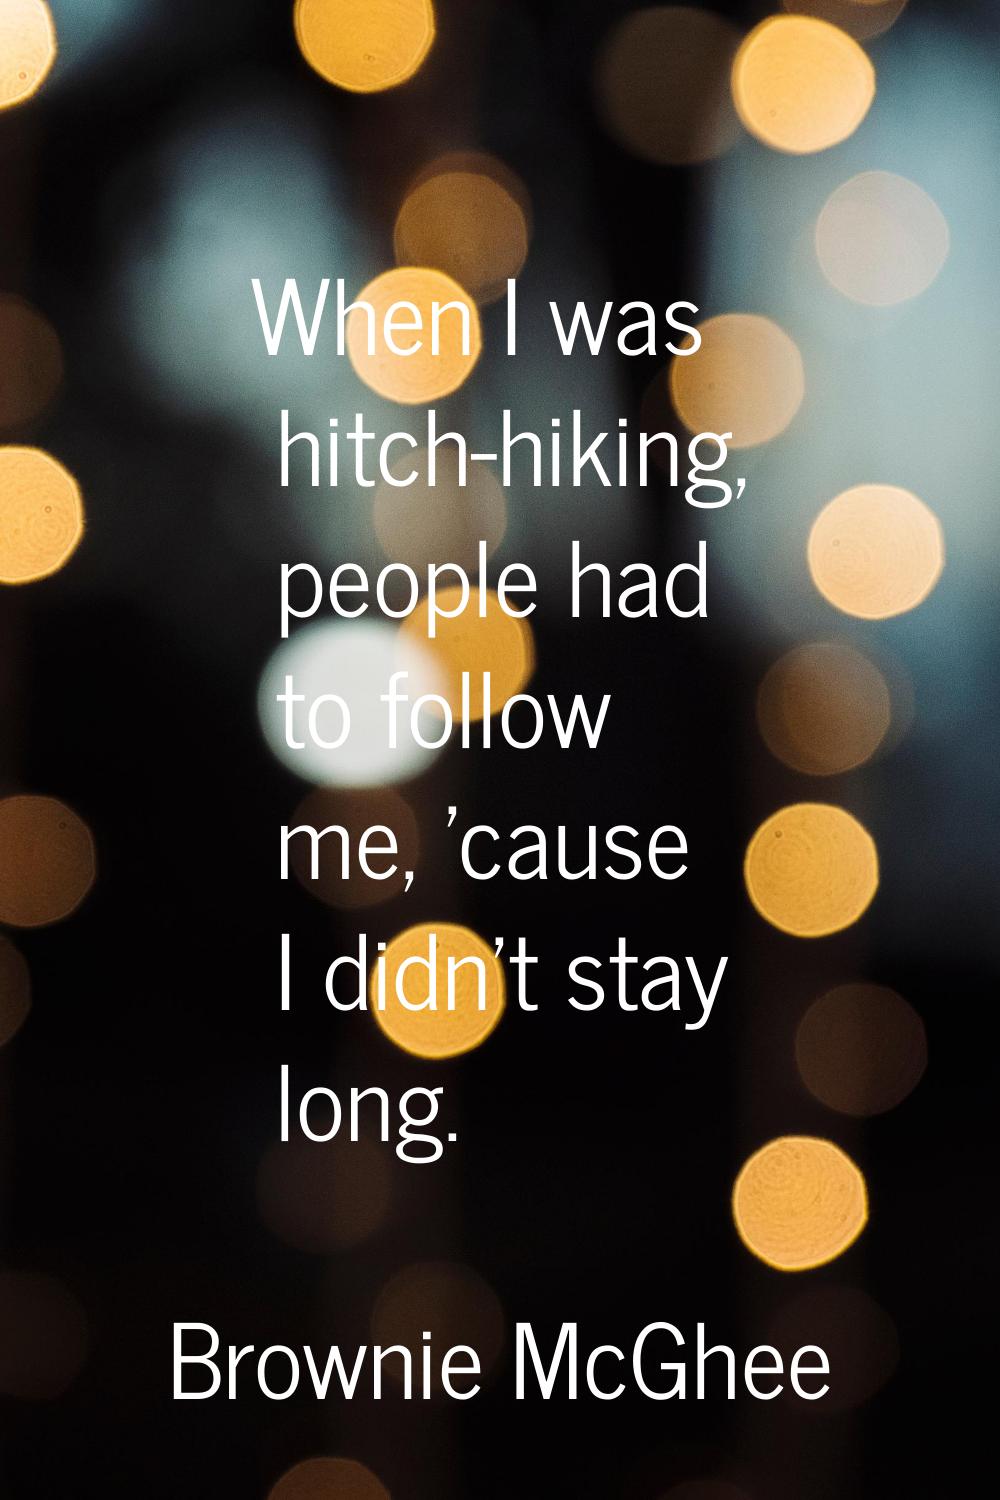 When I was hitch-hiking, people had to follow me, 'cause I didn't stay long.